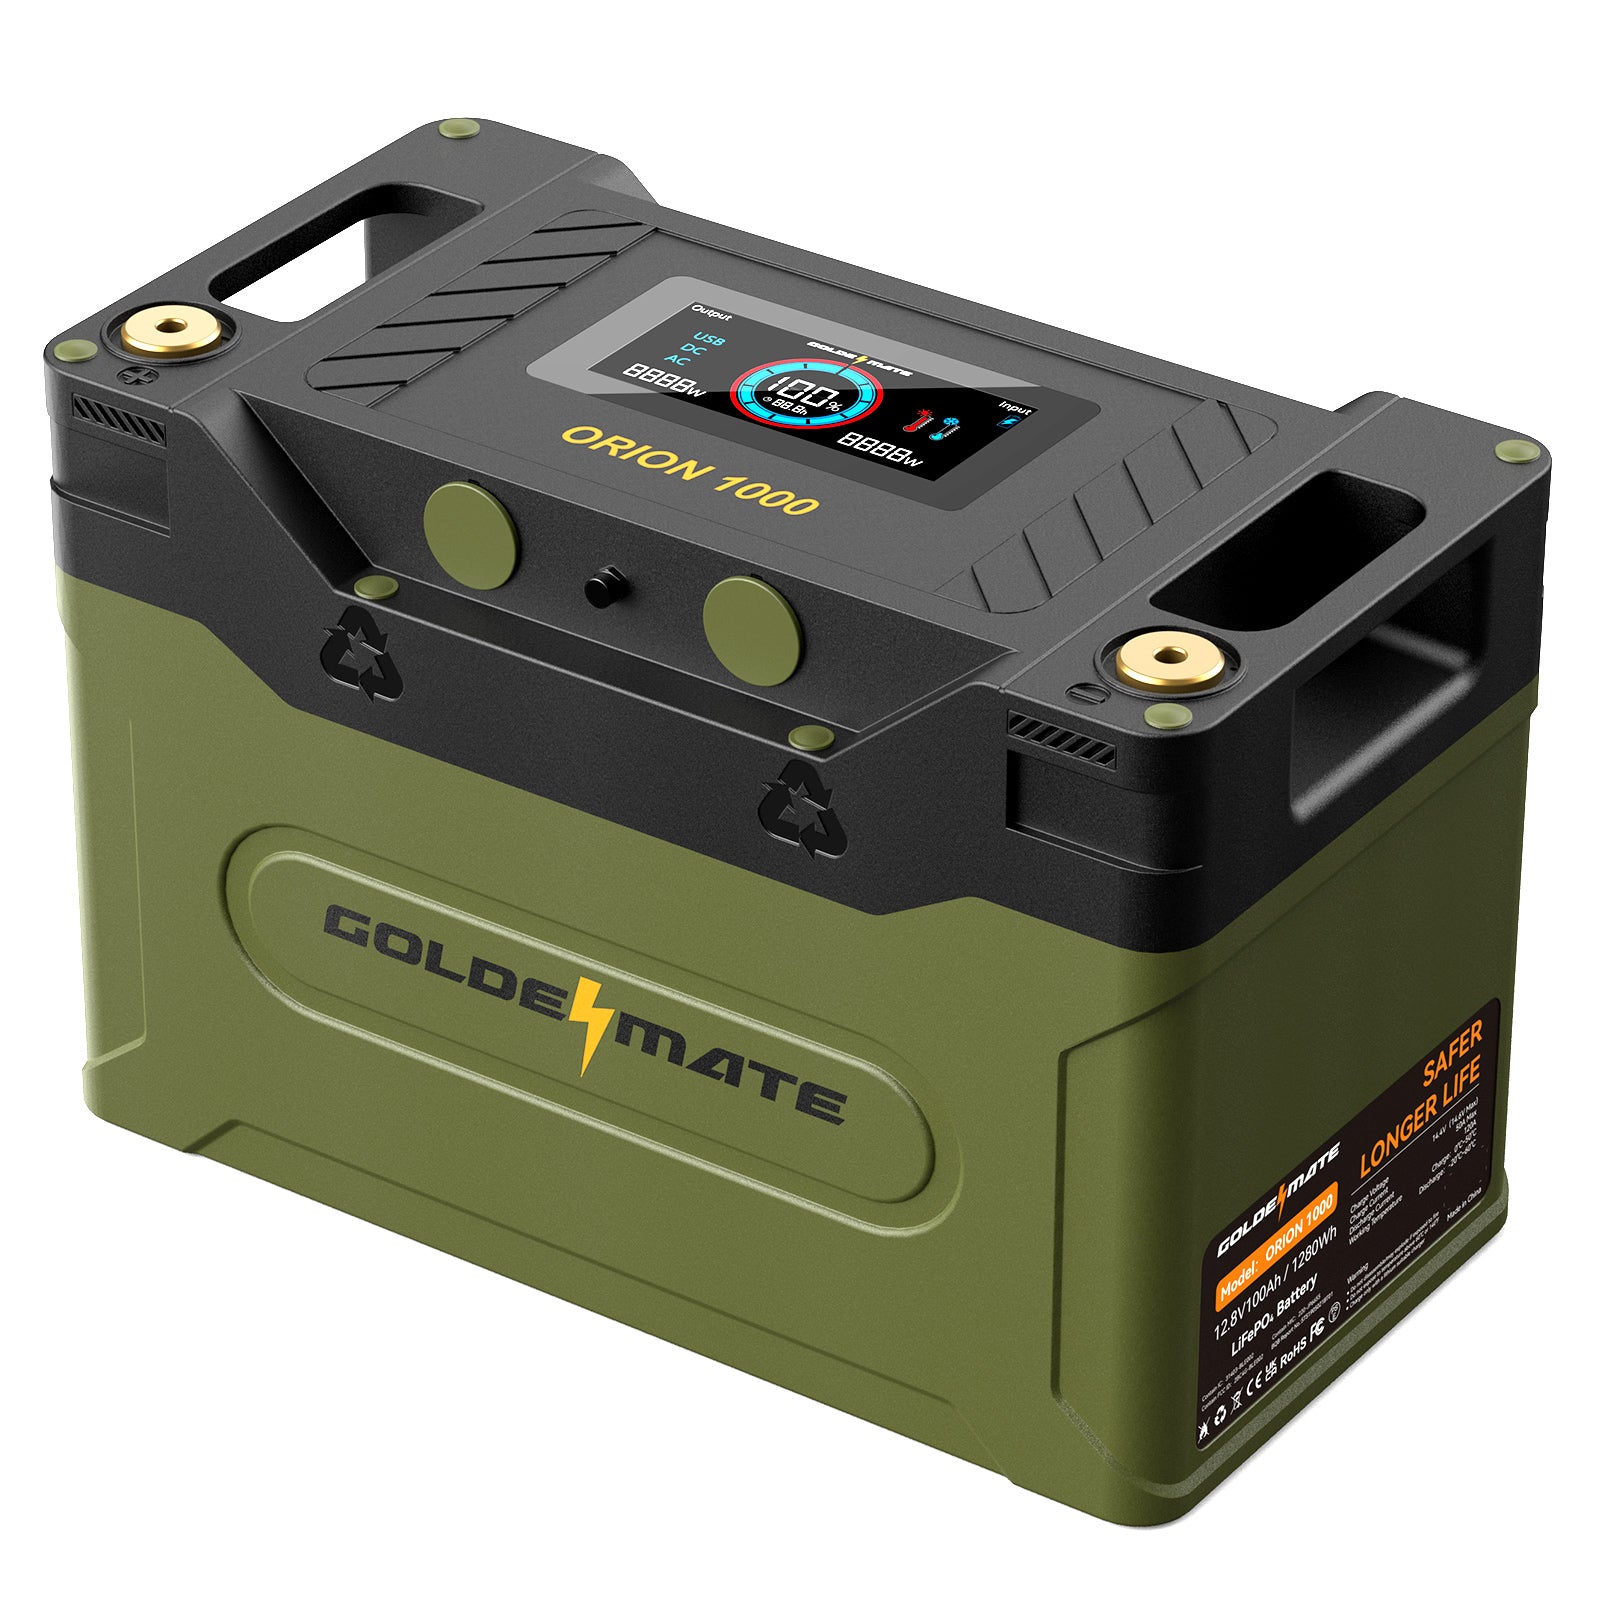 GoldenMate 12V 100Ah Orion 1000 Bluetooth LiFePO4 Lithium Battery, LCD Display, 1280Wh energy